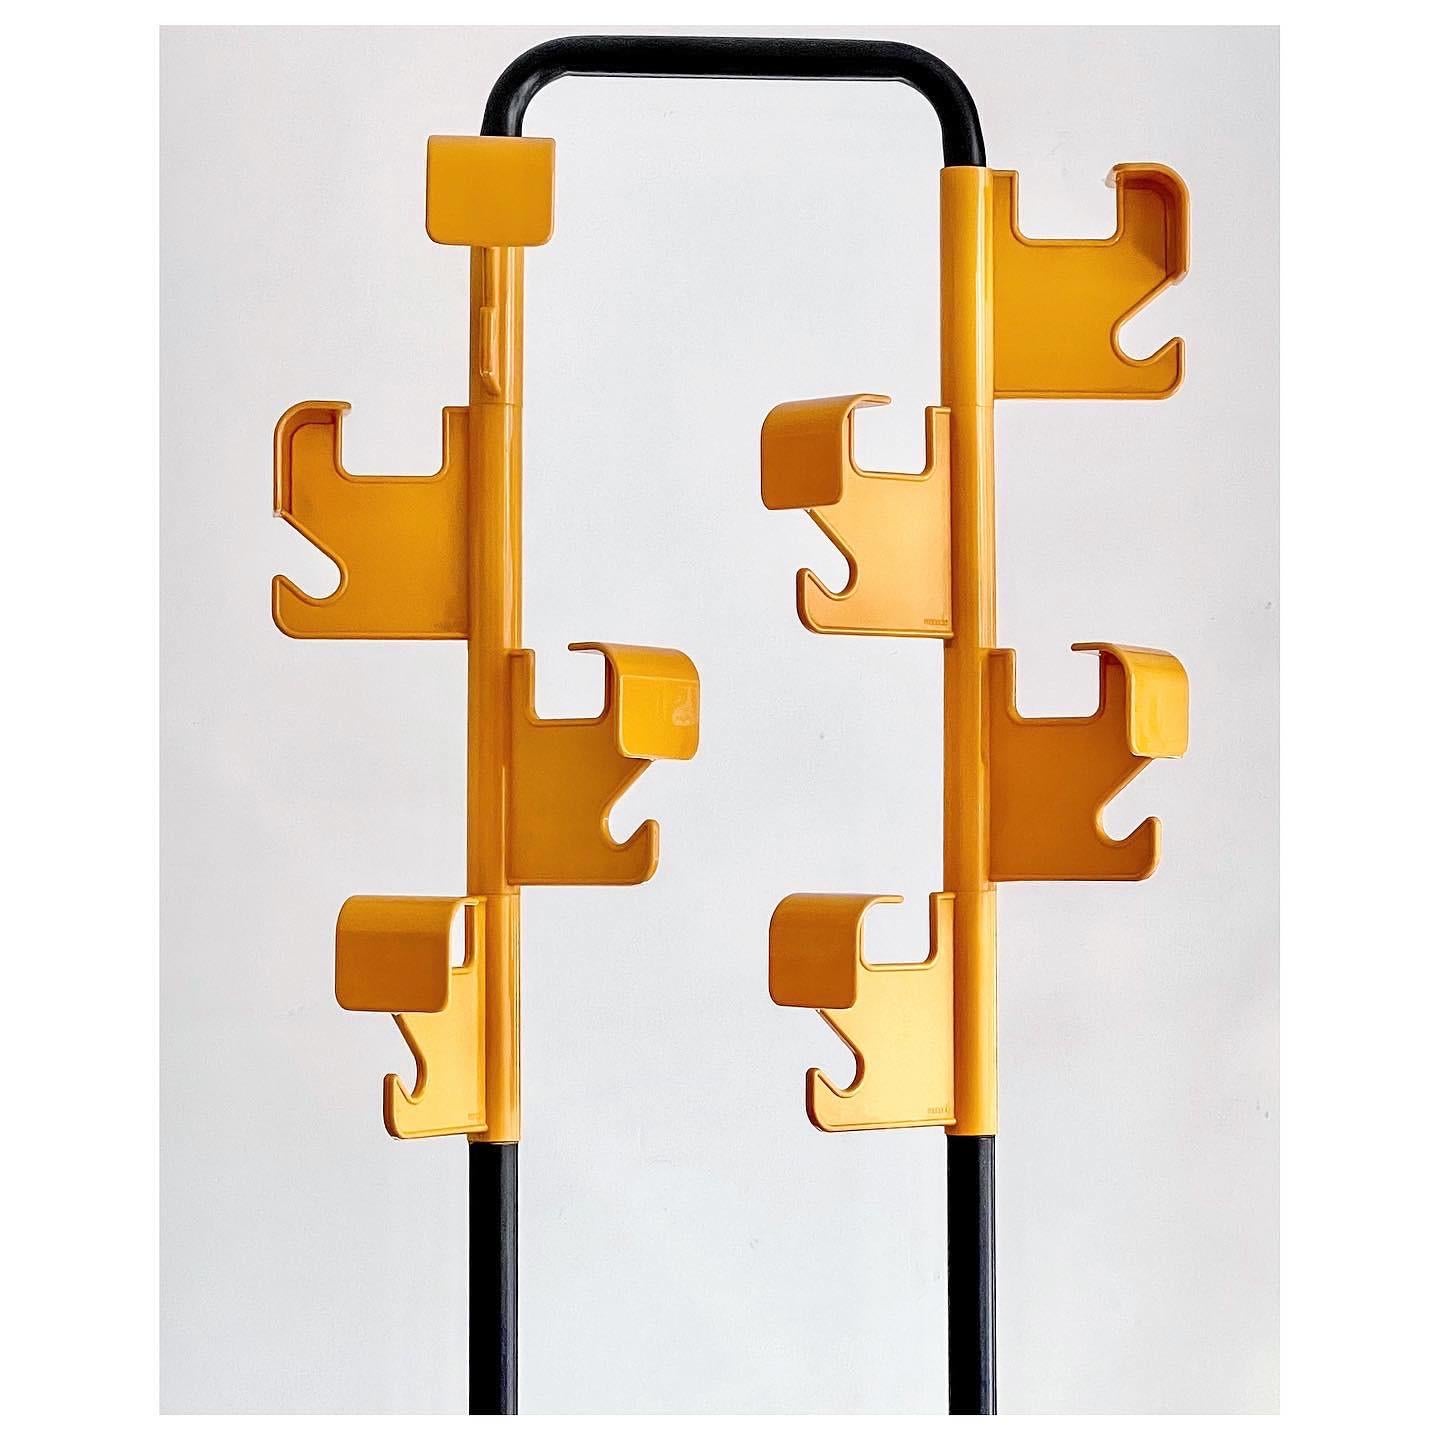 Colourful bright yellow coat rack by the French designer Jean-Pierre Vitrac for Manade, 1970s. 
The coat rack has a tubular structure of black painted metal, attached to a heavy square base, to catch any water from your umbrella. Two sets of 4